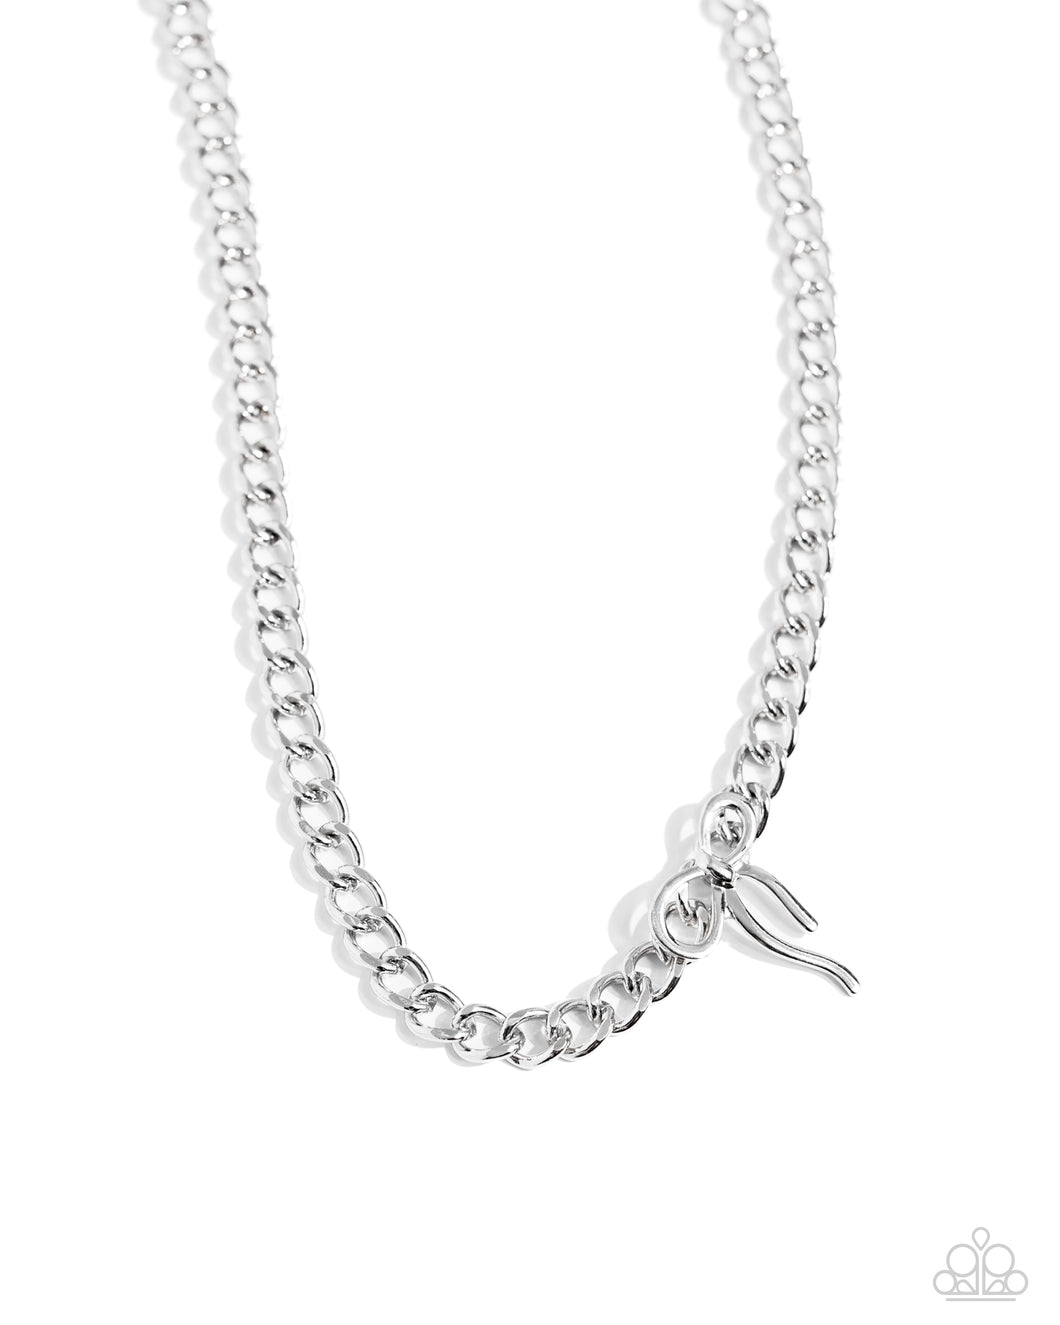 Leading Loops - Silver Bow) Necklace